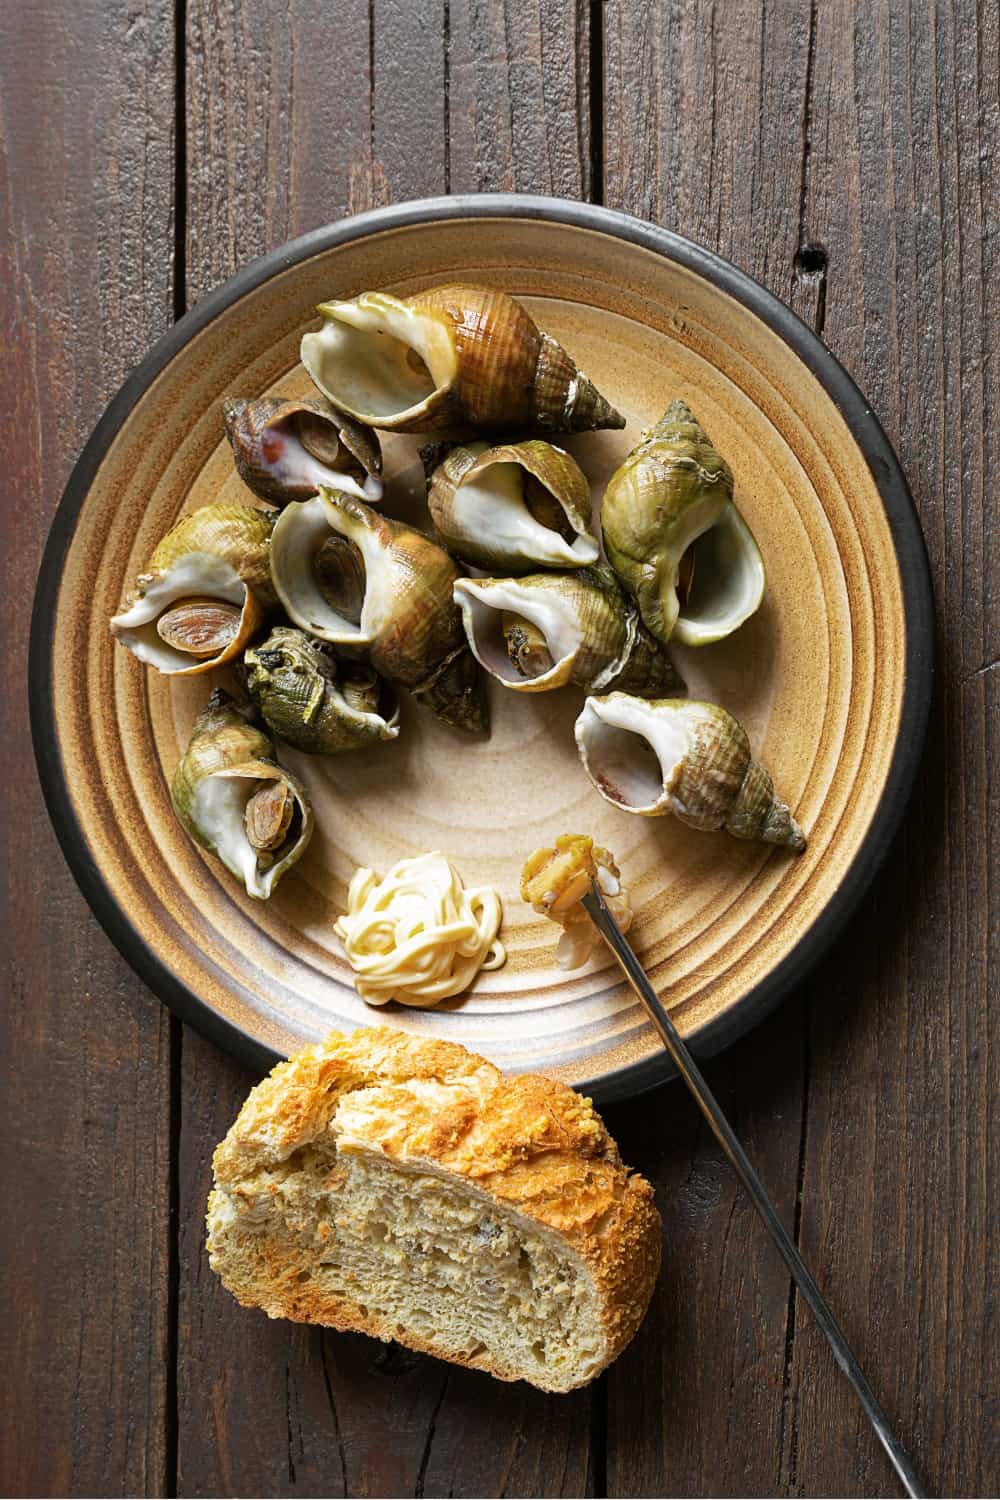 photo of whelks on a plate with a piece of bread